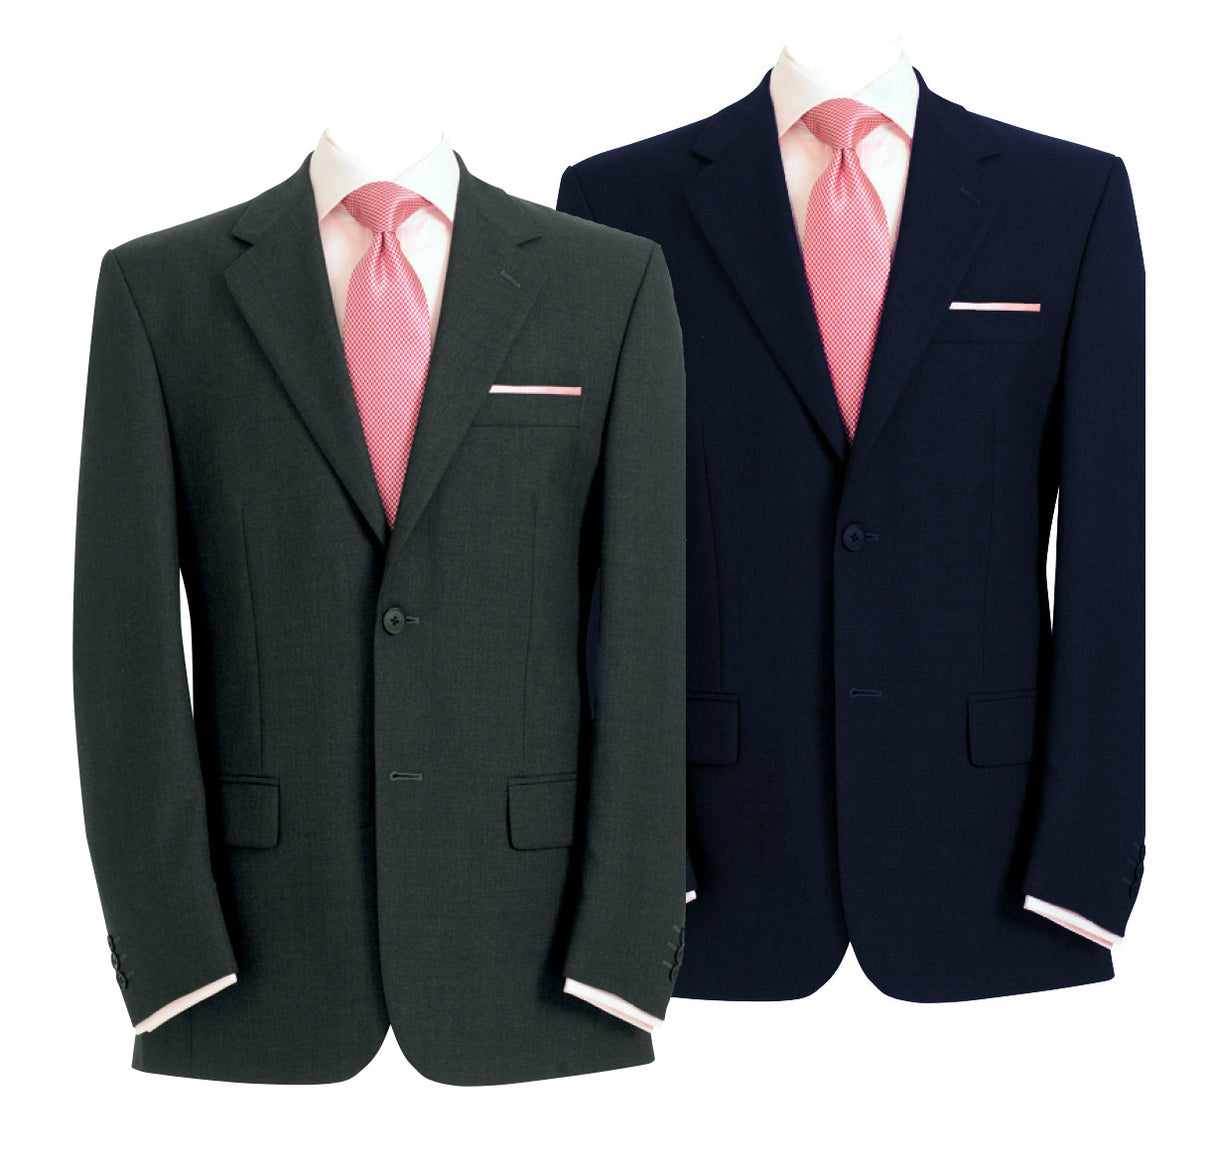 Clubclass Dockland E4J0459 Polywool Single Breast 2 Buttons Suit Jacket